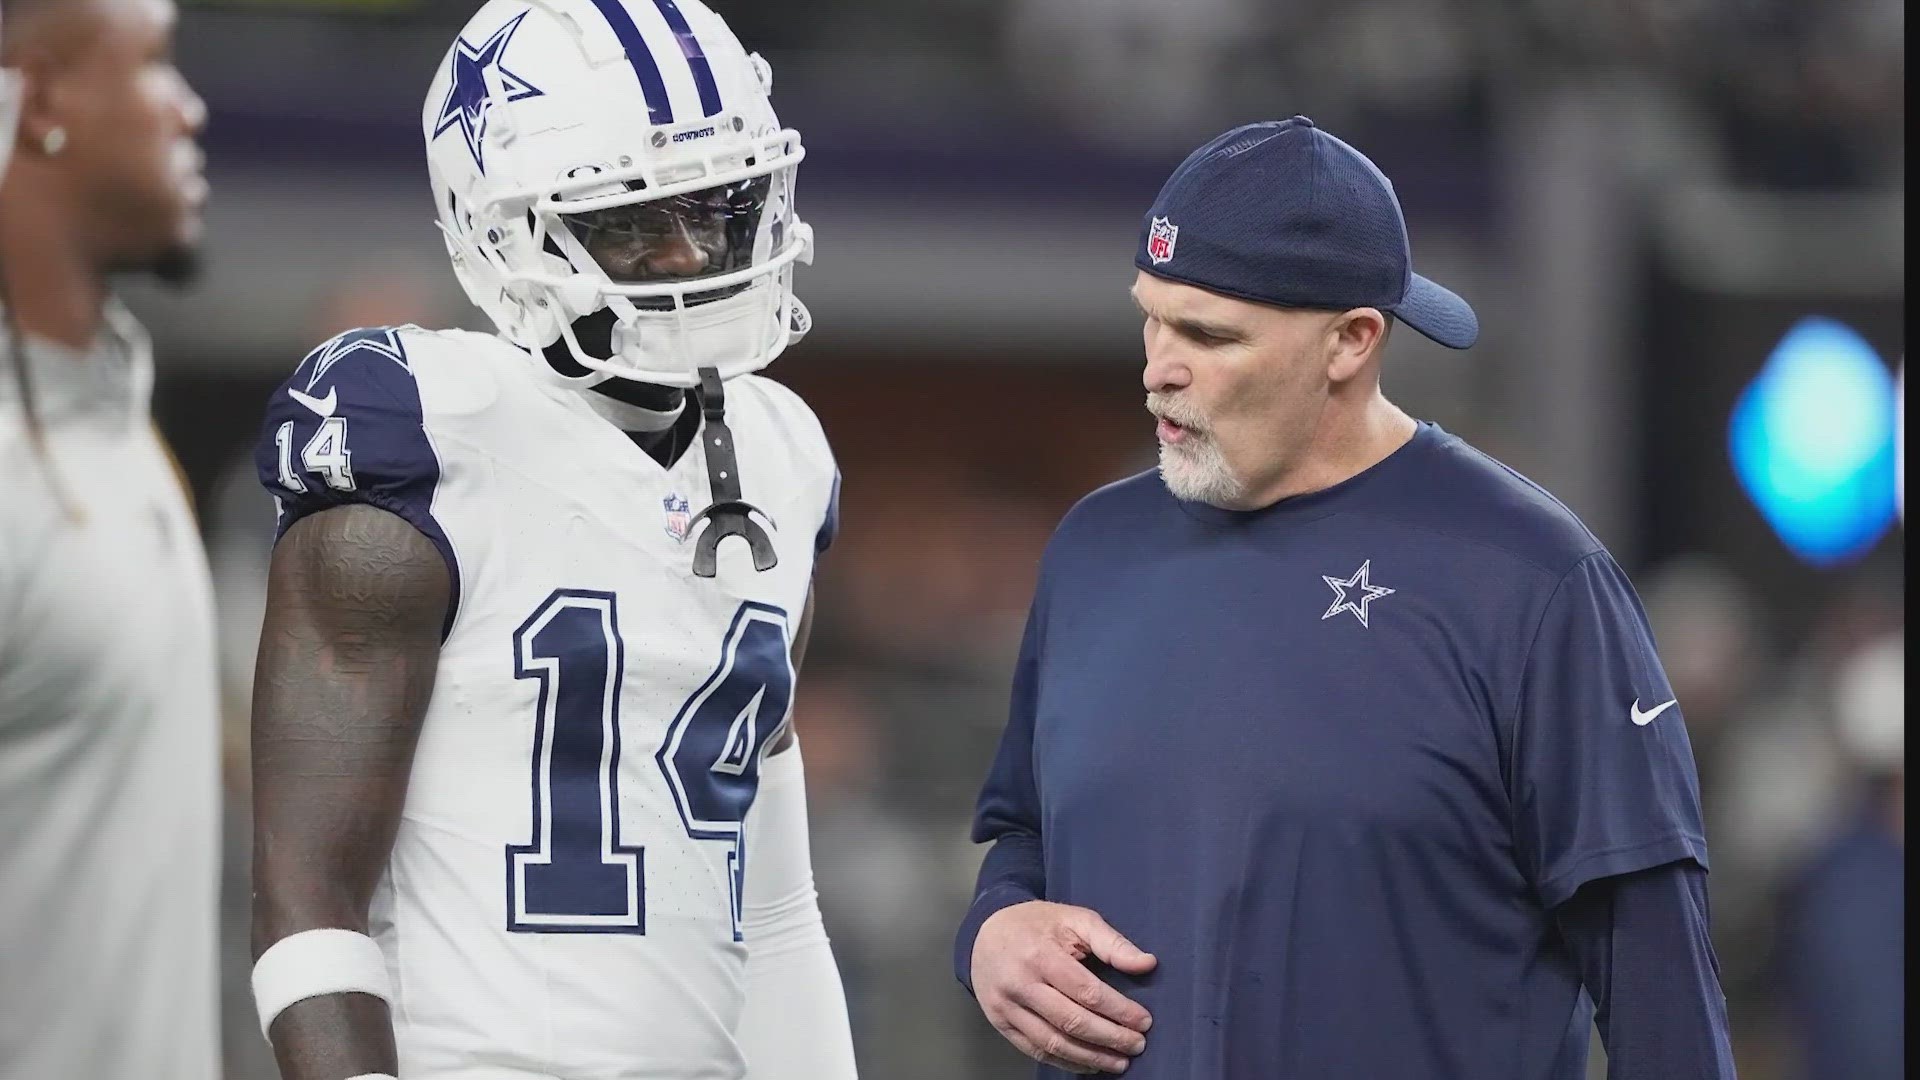 The Cowboys defensive coordinator is headed to lead a division rival, according to reports.